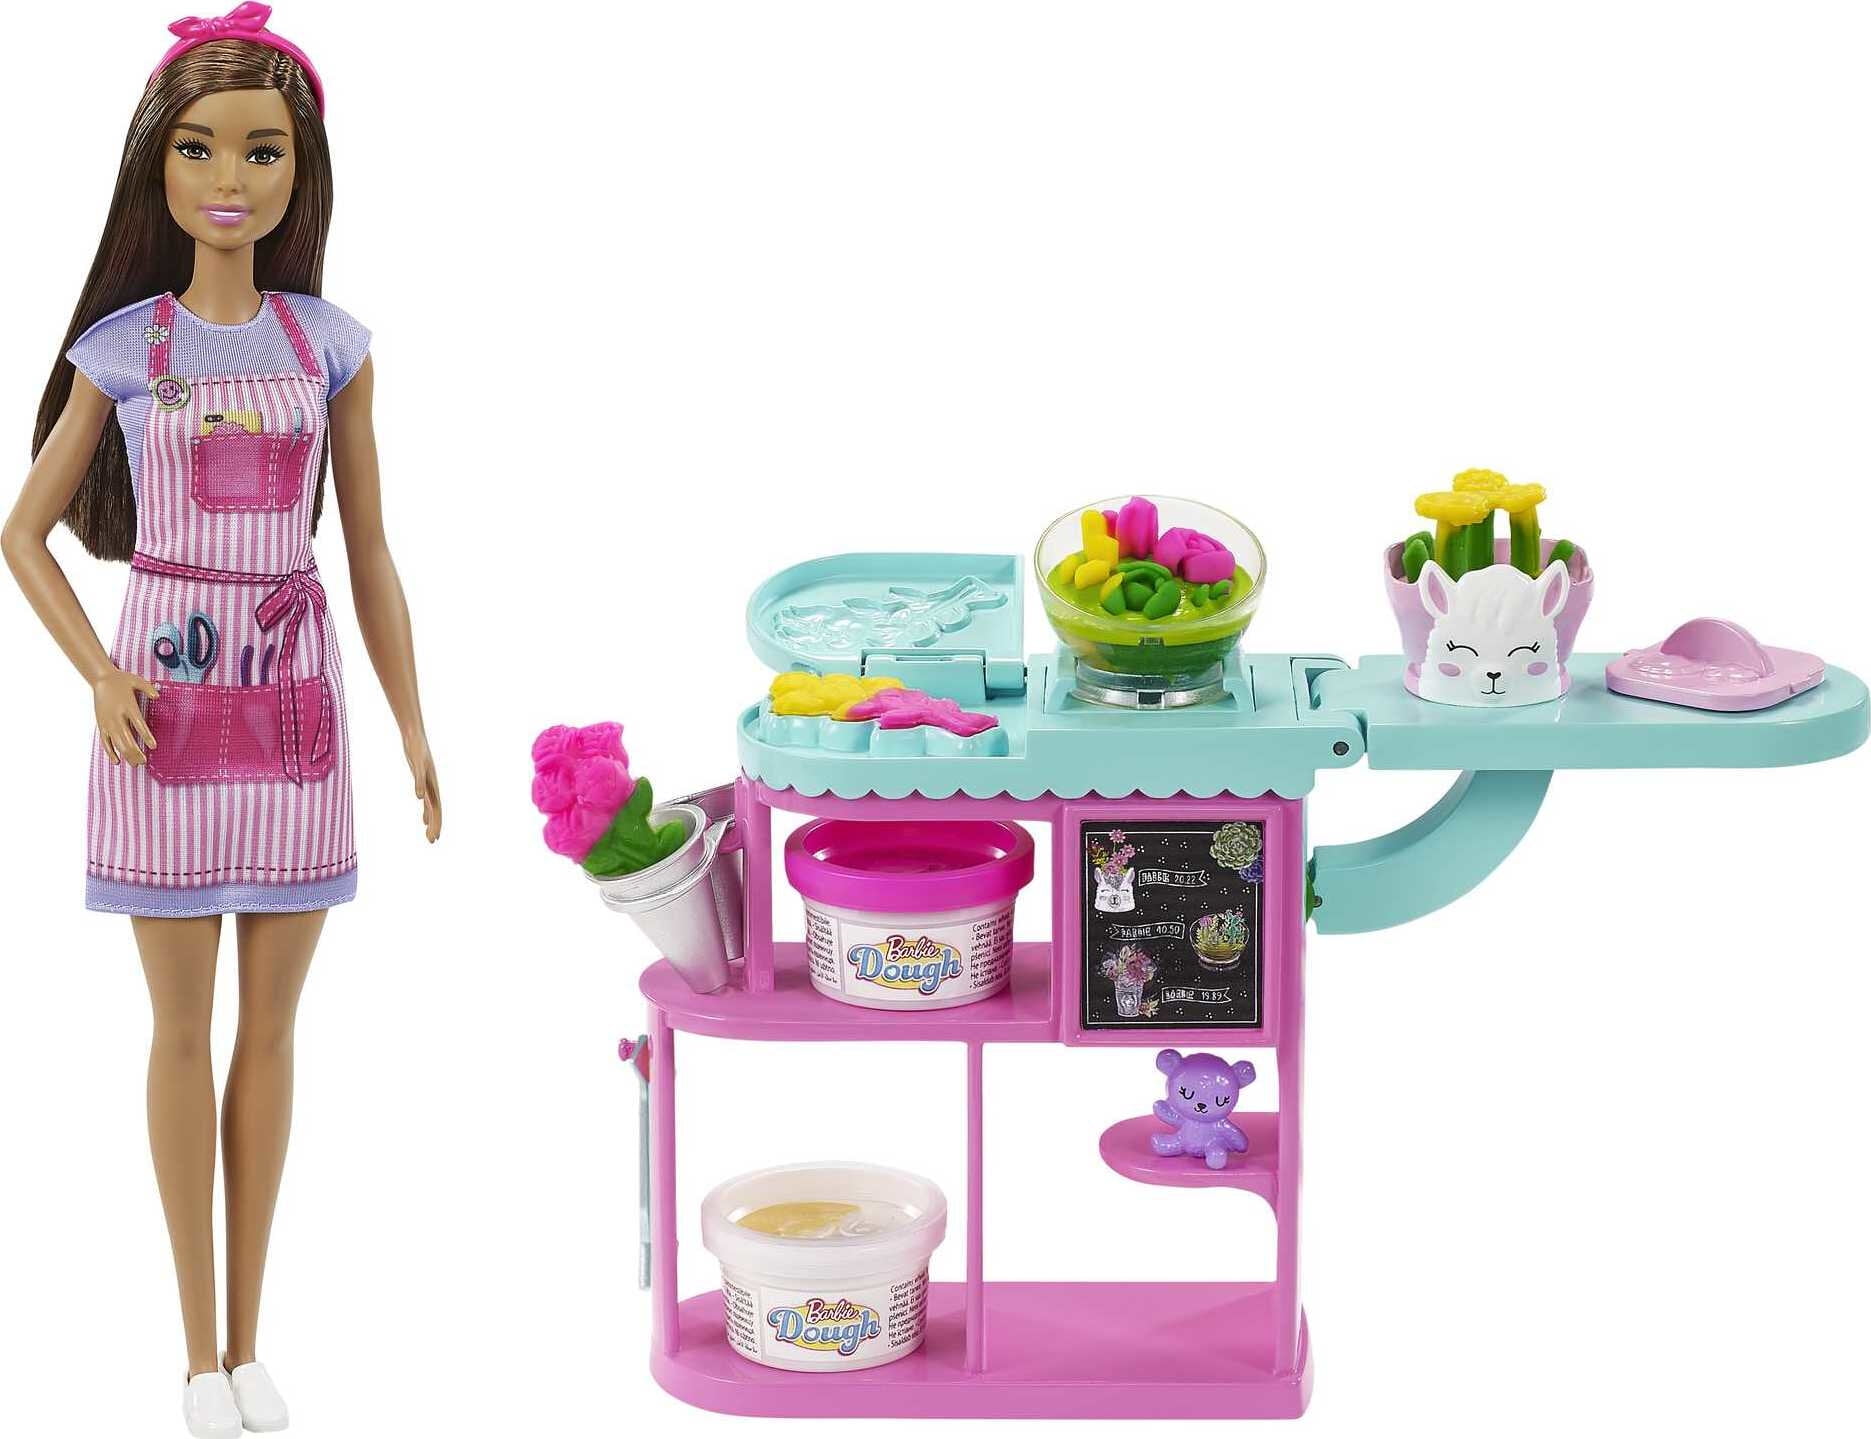 Barbie Florist Doll & Playset with Flower-Making Station, Molds, Dough & Accessories, Brunette Doll